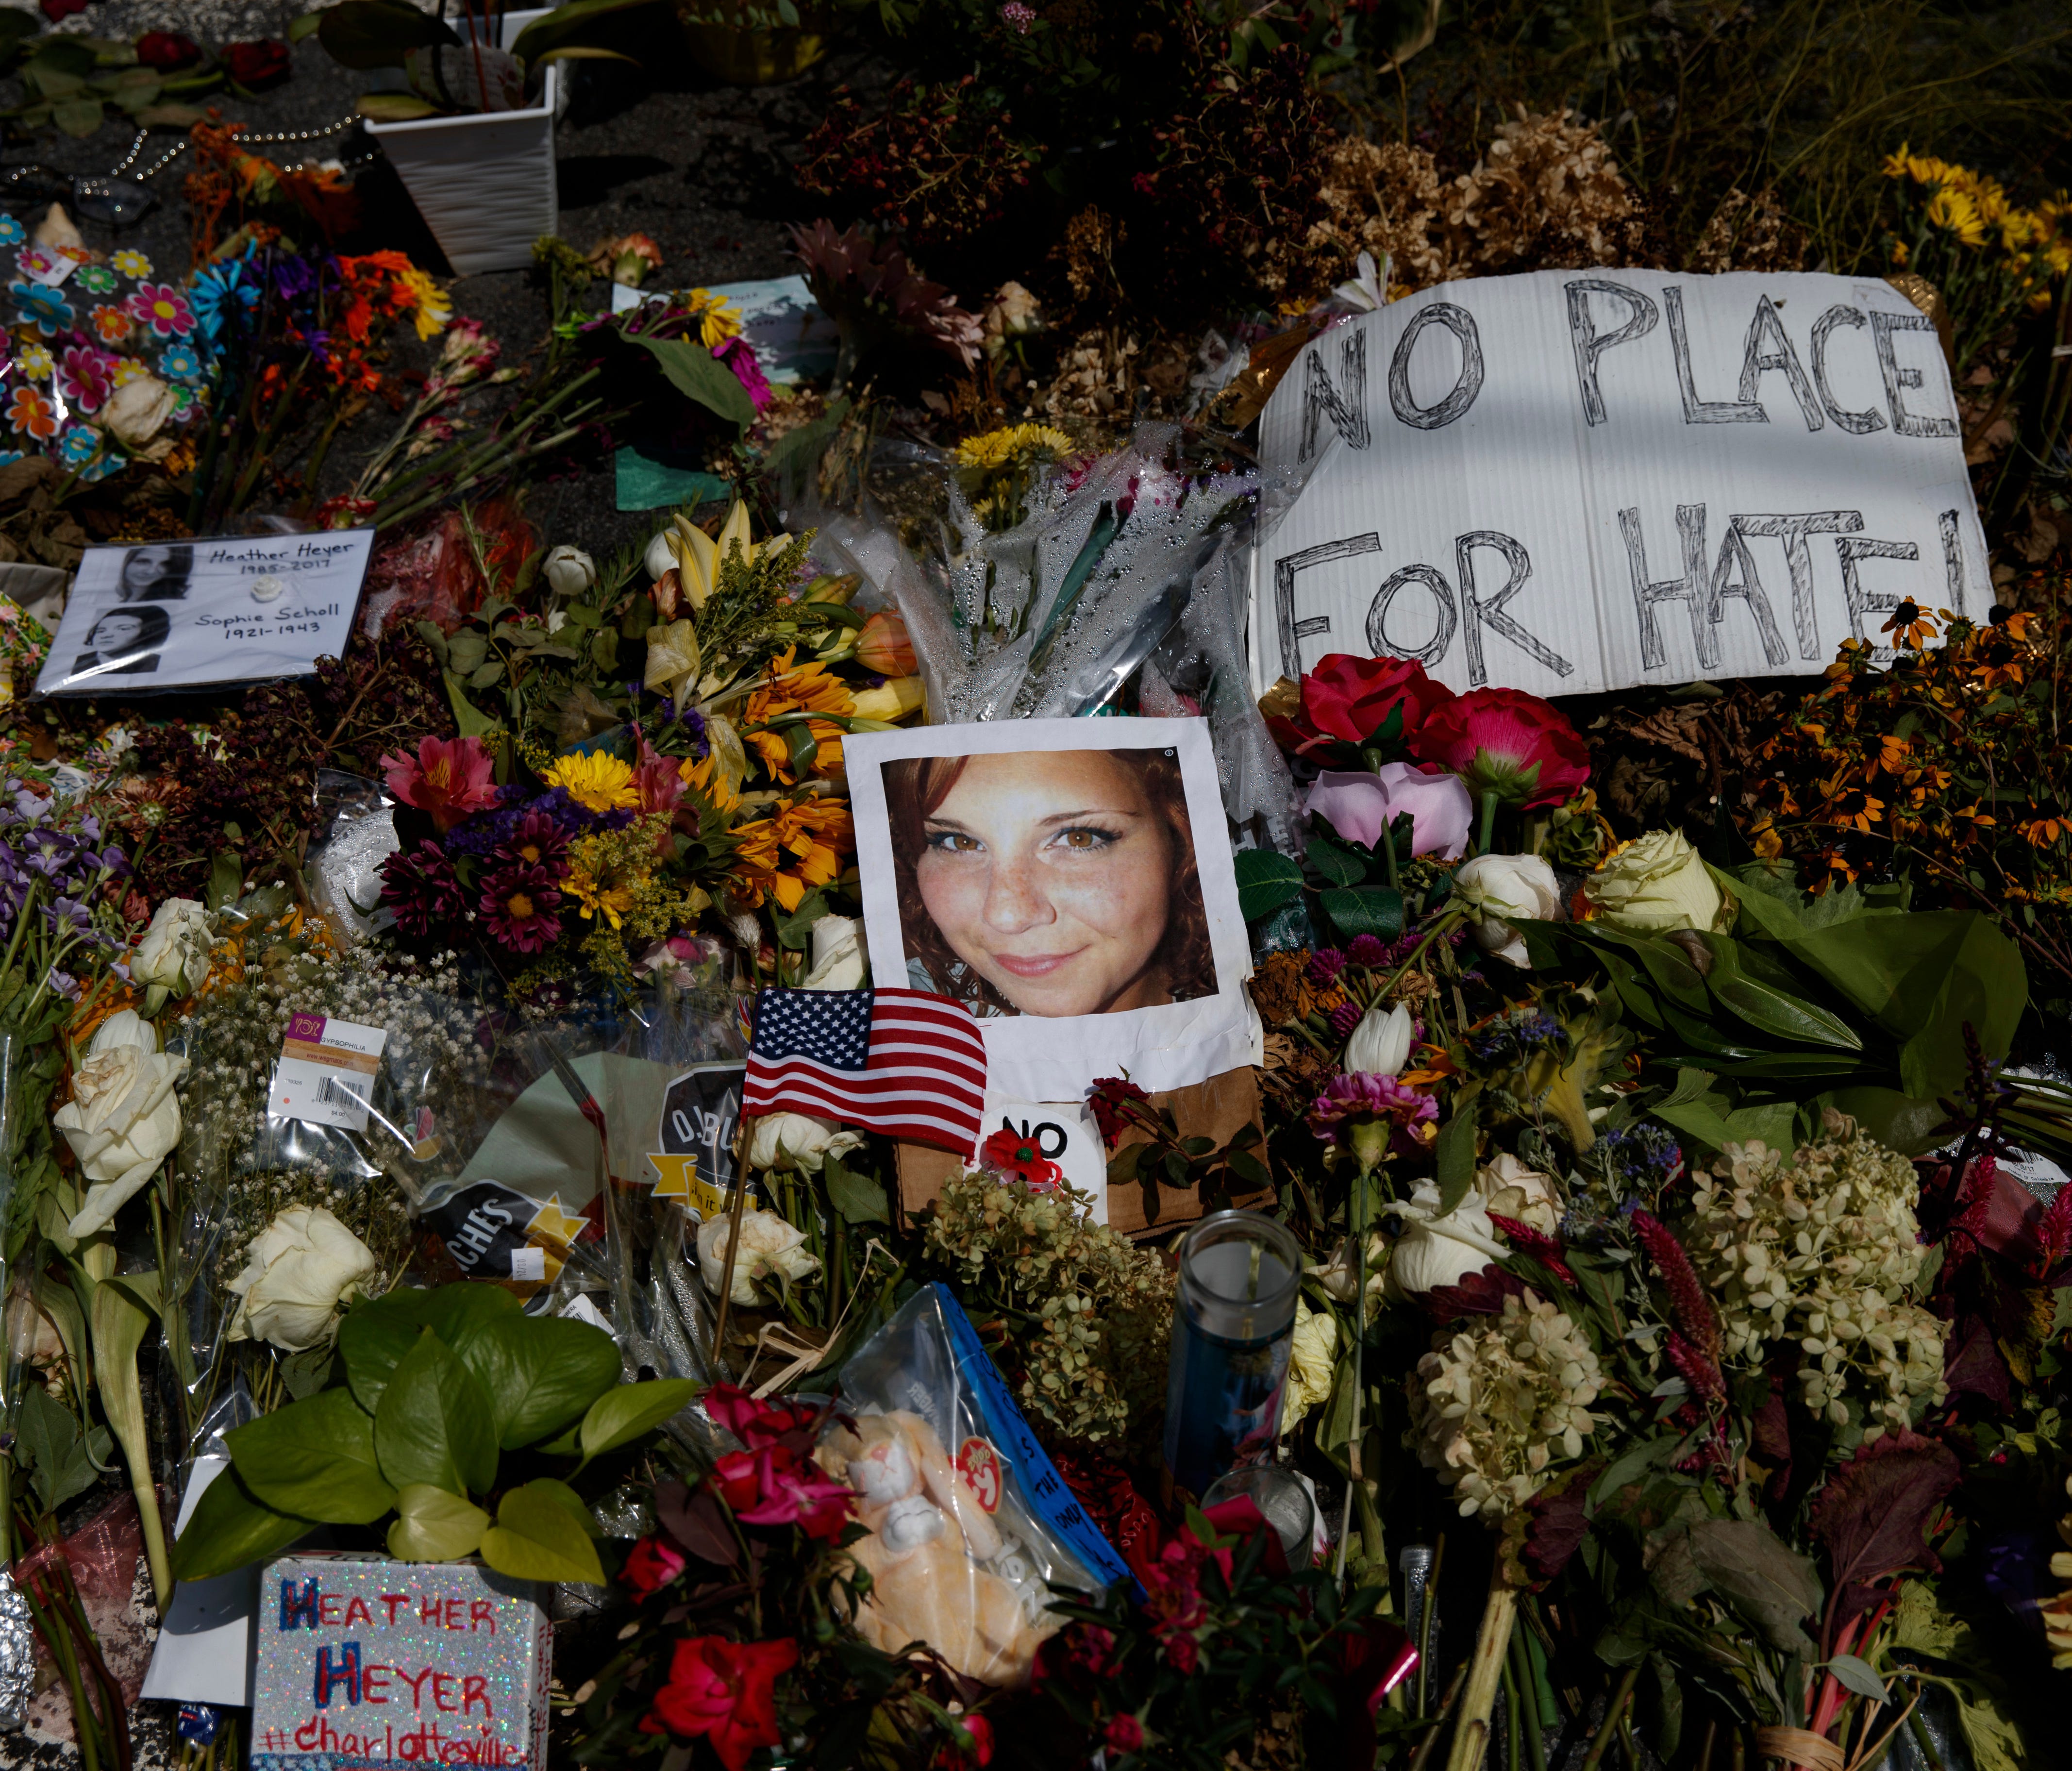 A photo of Heather Heyer, who was killed during a white nationalist rally, sits on the ground at a memorial the day her life was celebrated at the Paramount Theater on Aug. 16, 2017 in Charlottesville, Va.